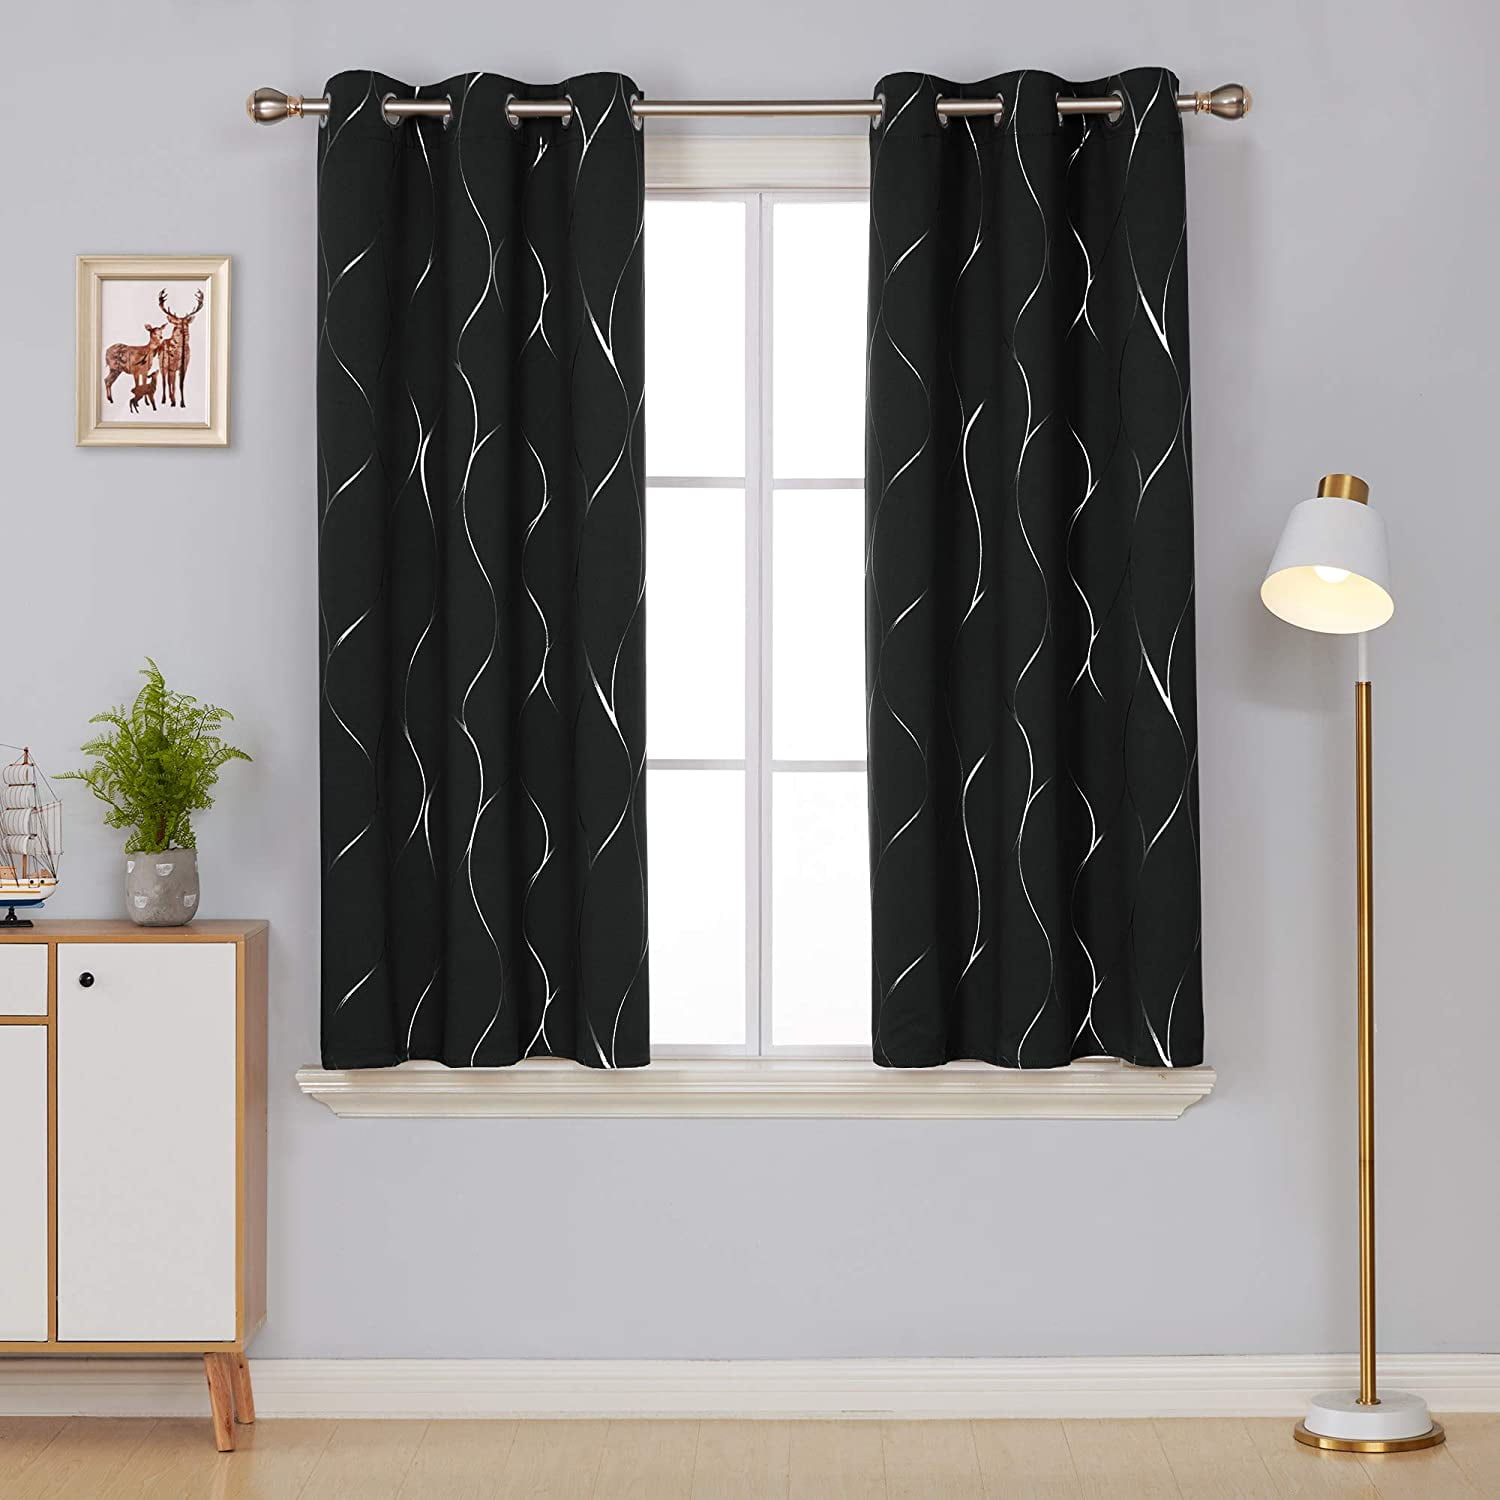 Details about   Deconovo Thermal Insulated Blackout Curtains for Kids Room with Silver Star Prin 